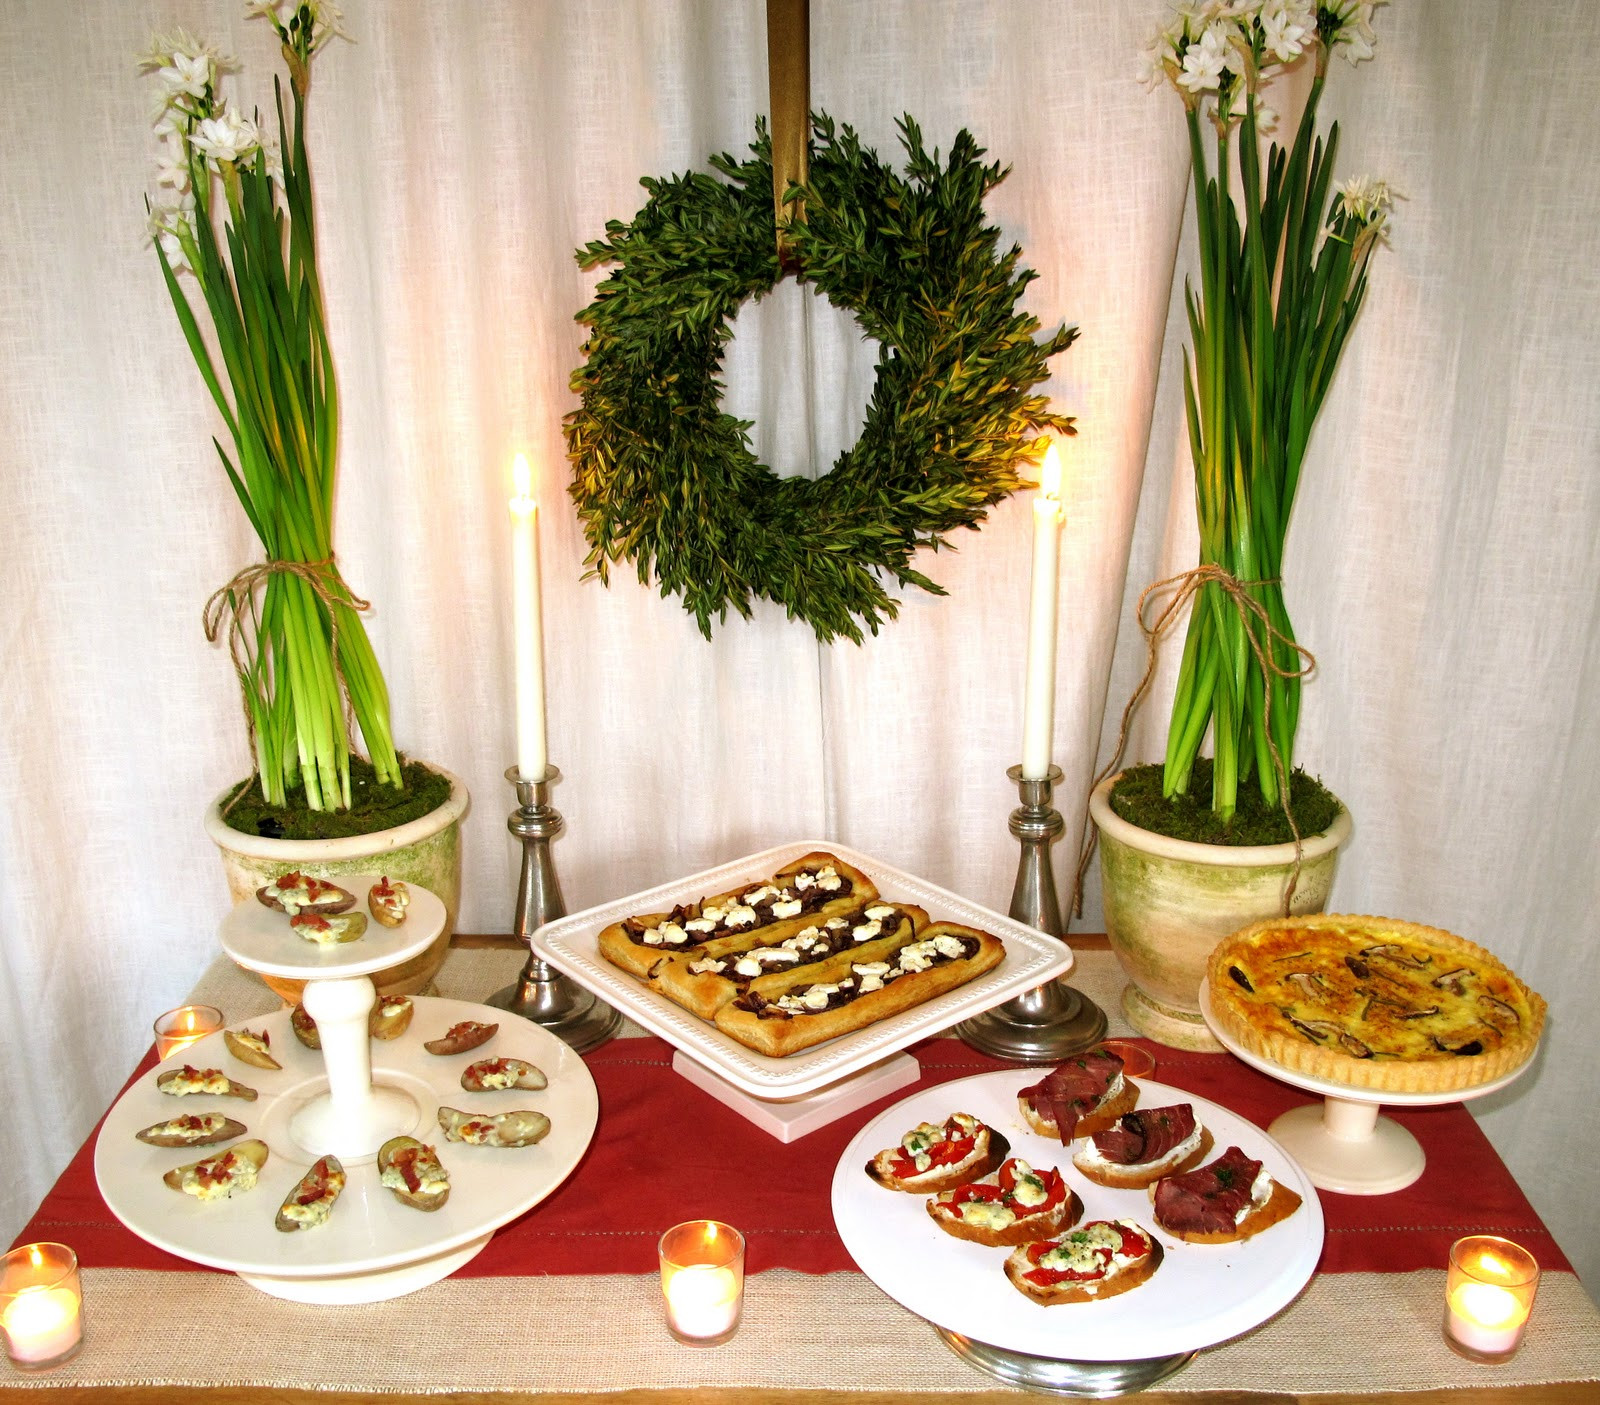 Holiday Cocktail Party Food Ideas
 Jenny Steffens Hobick Holidays Entertaining